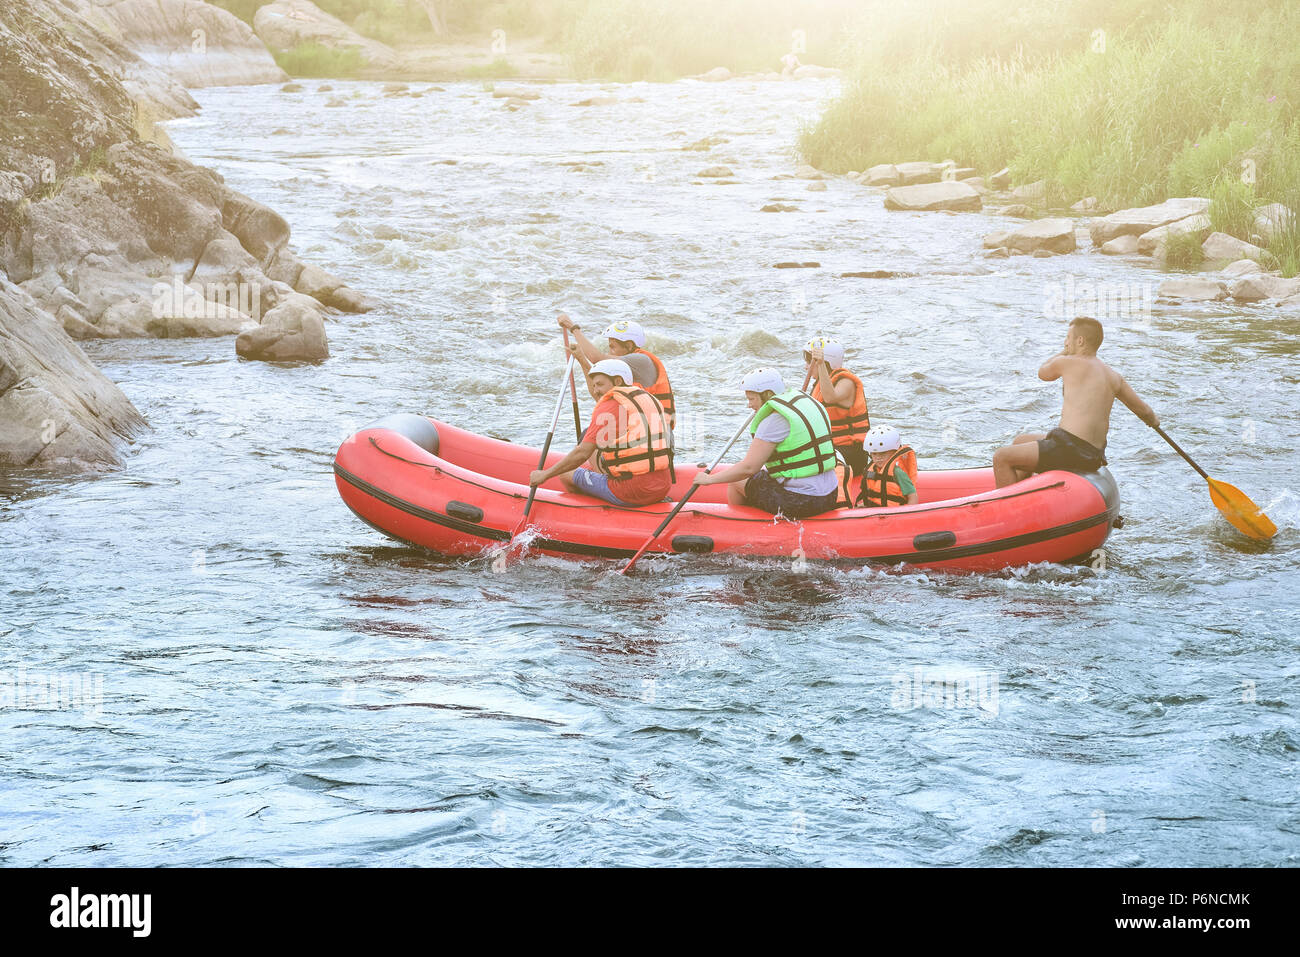 Ukraine Migea. 12 june 2018. Pivdenny Buh. A group of people makes rafting in the waters of the river. White water rafting Stock Photo